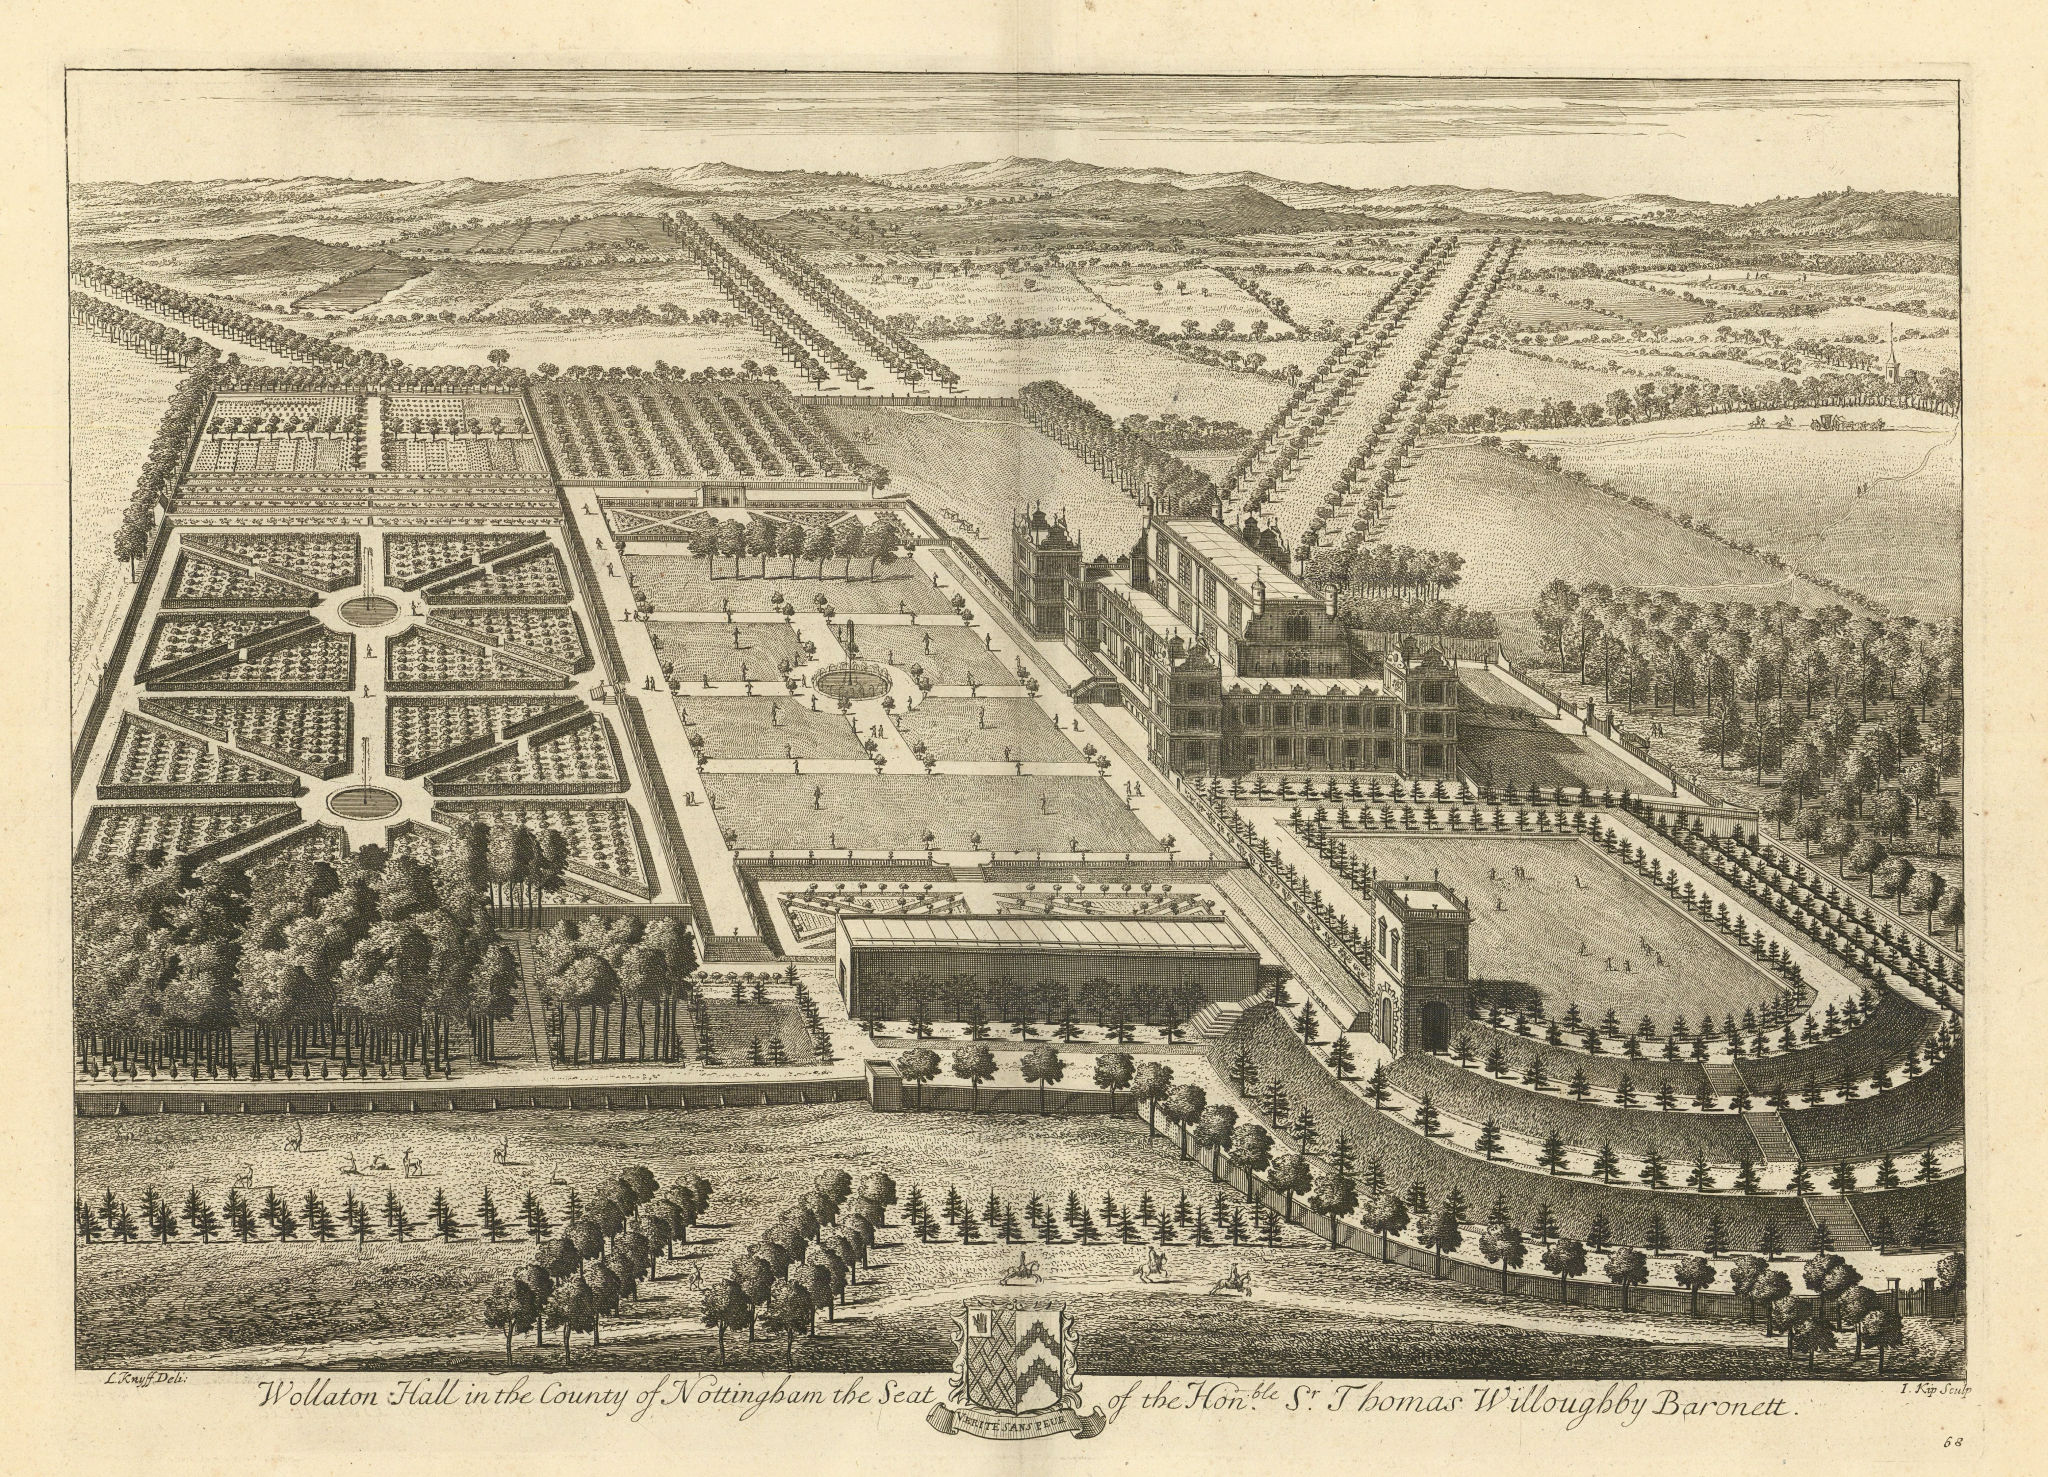 Wollaton Hall in the County of Nottingham. Natural History Museum Kip/Knyff 1709